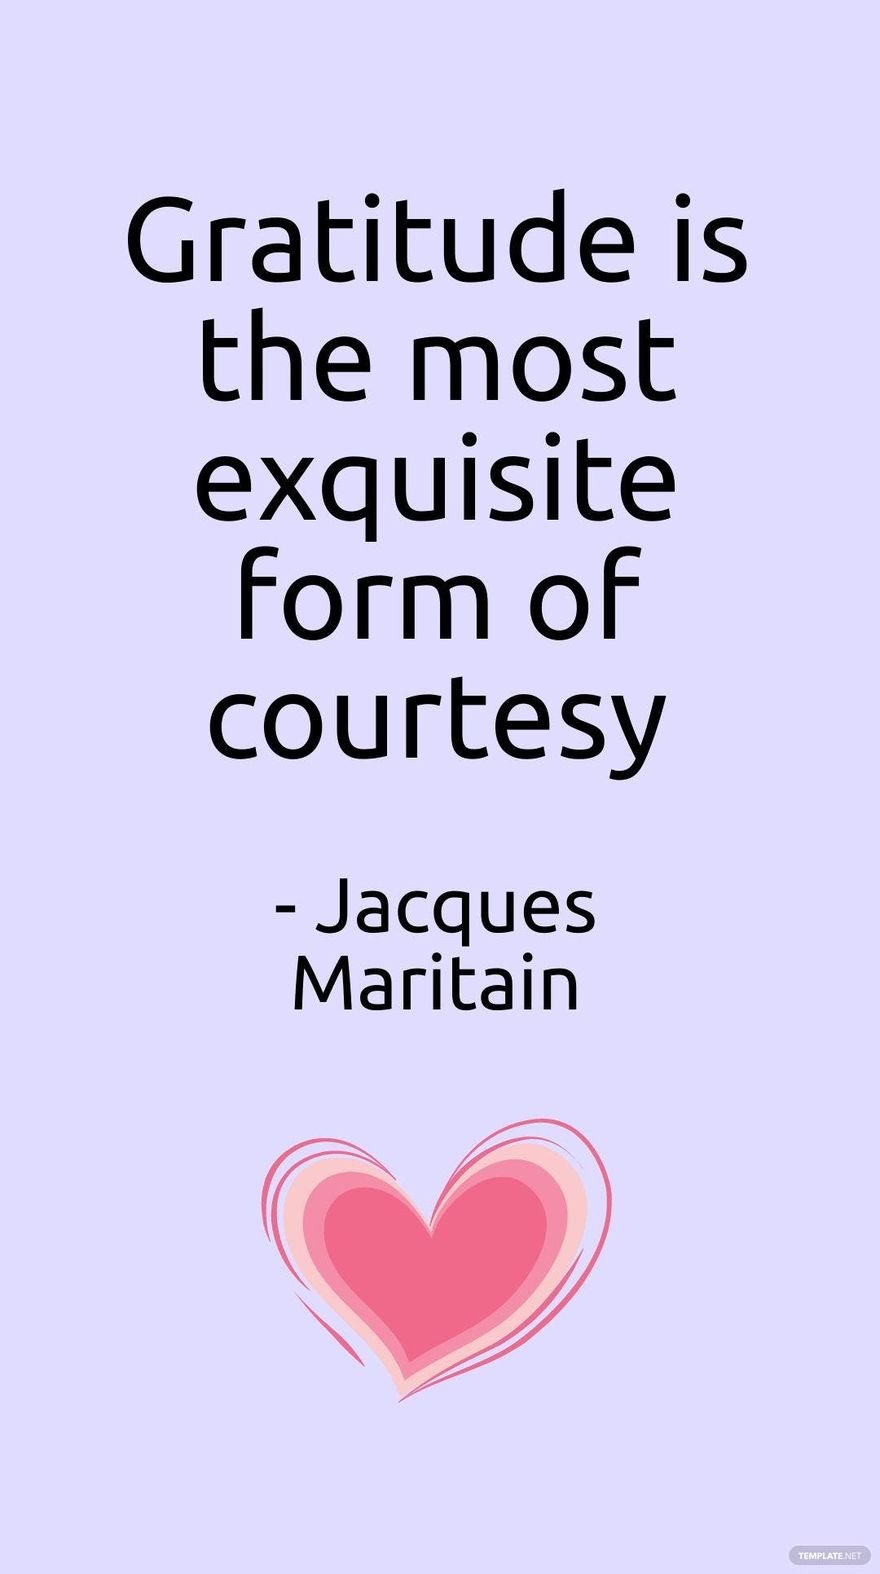 Jacques Maritain - Gratitude is the most exquisite form of courtesy in JPG  - Download